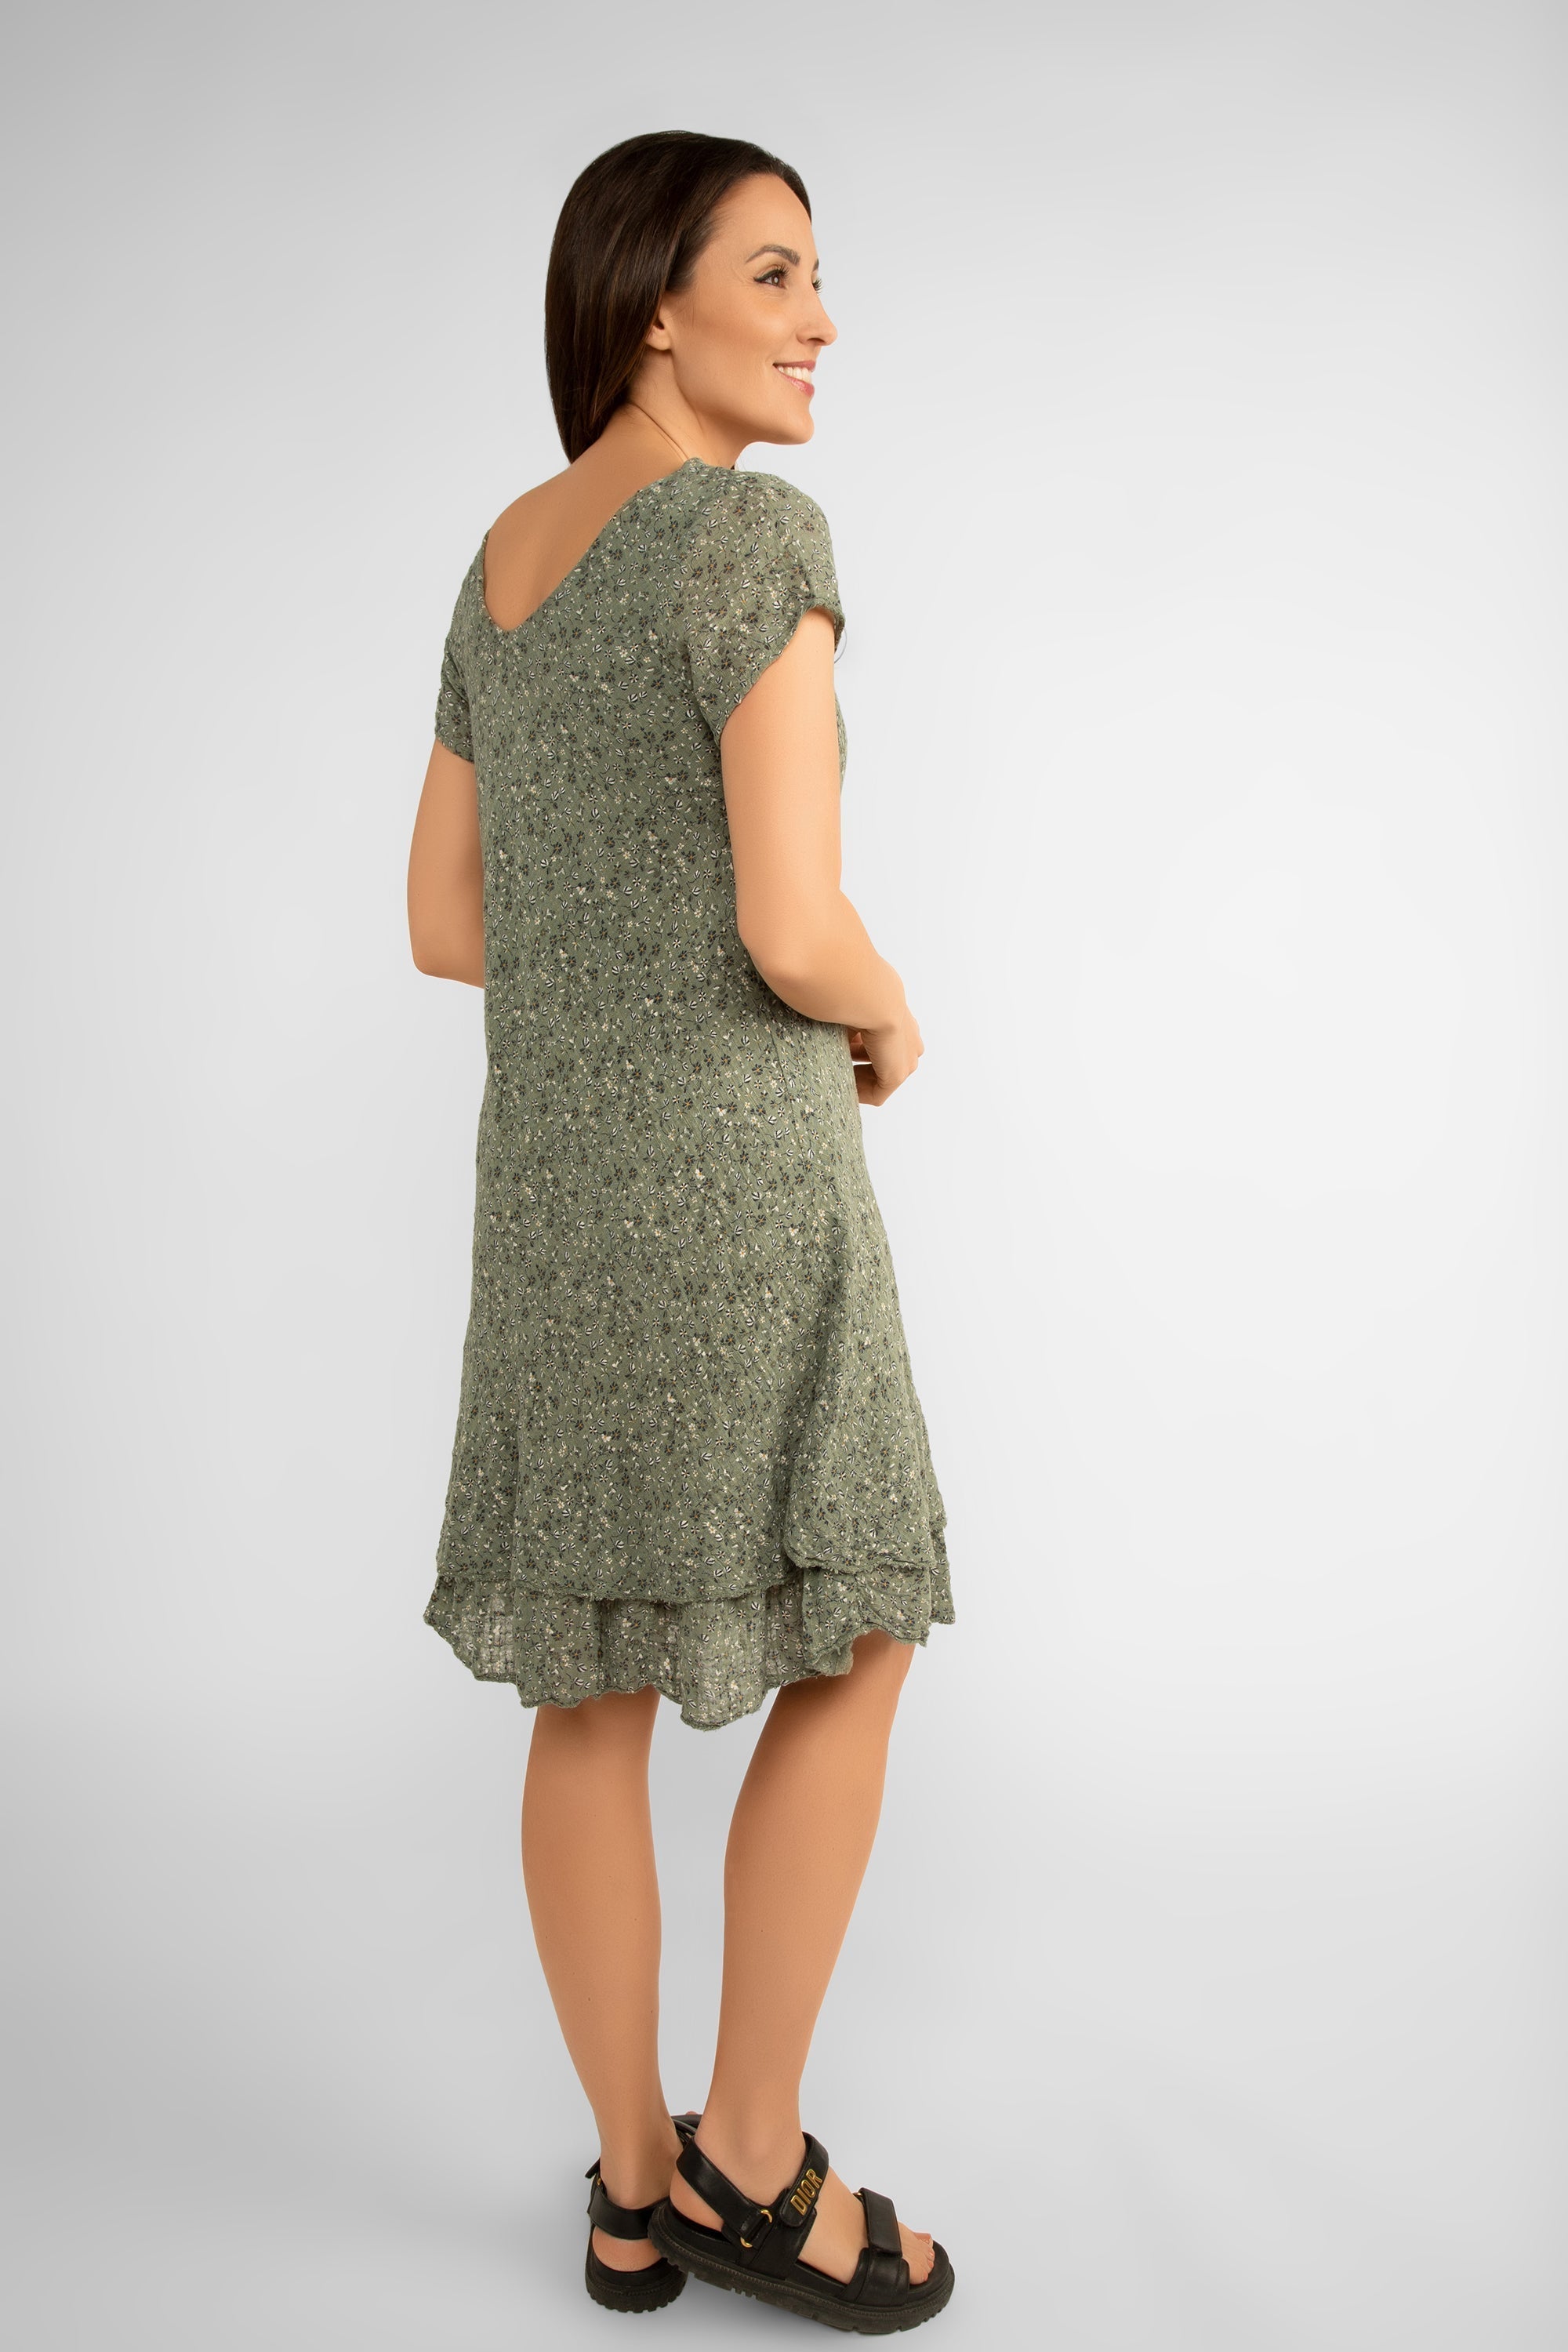 Back view of Bella Amore (6859B) Women's Short Sleeve V-Neck Knee Length Skirt in Military Green Ditsy Floral Print